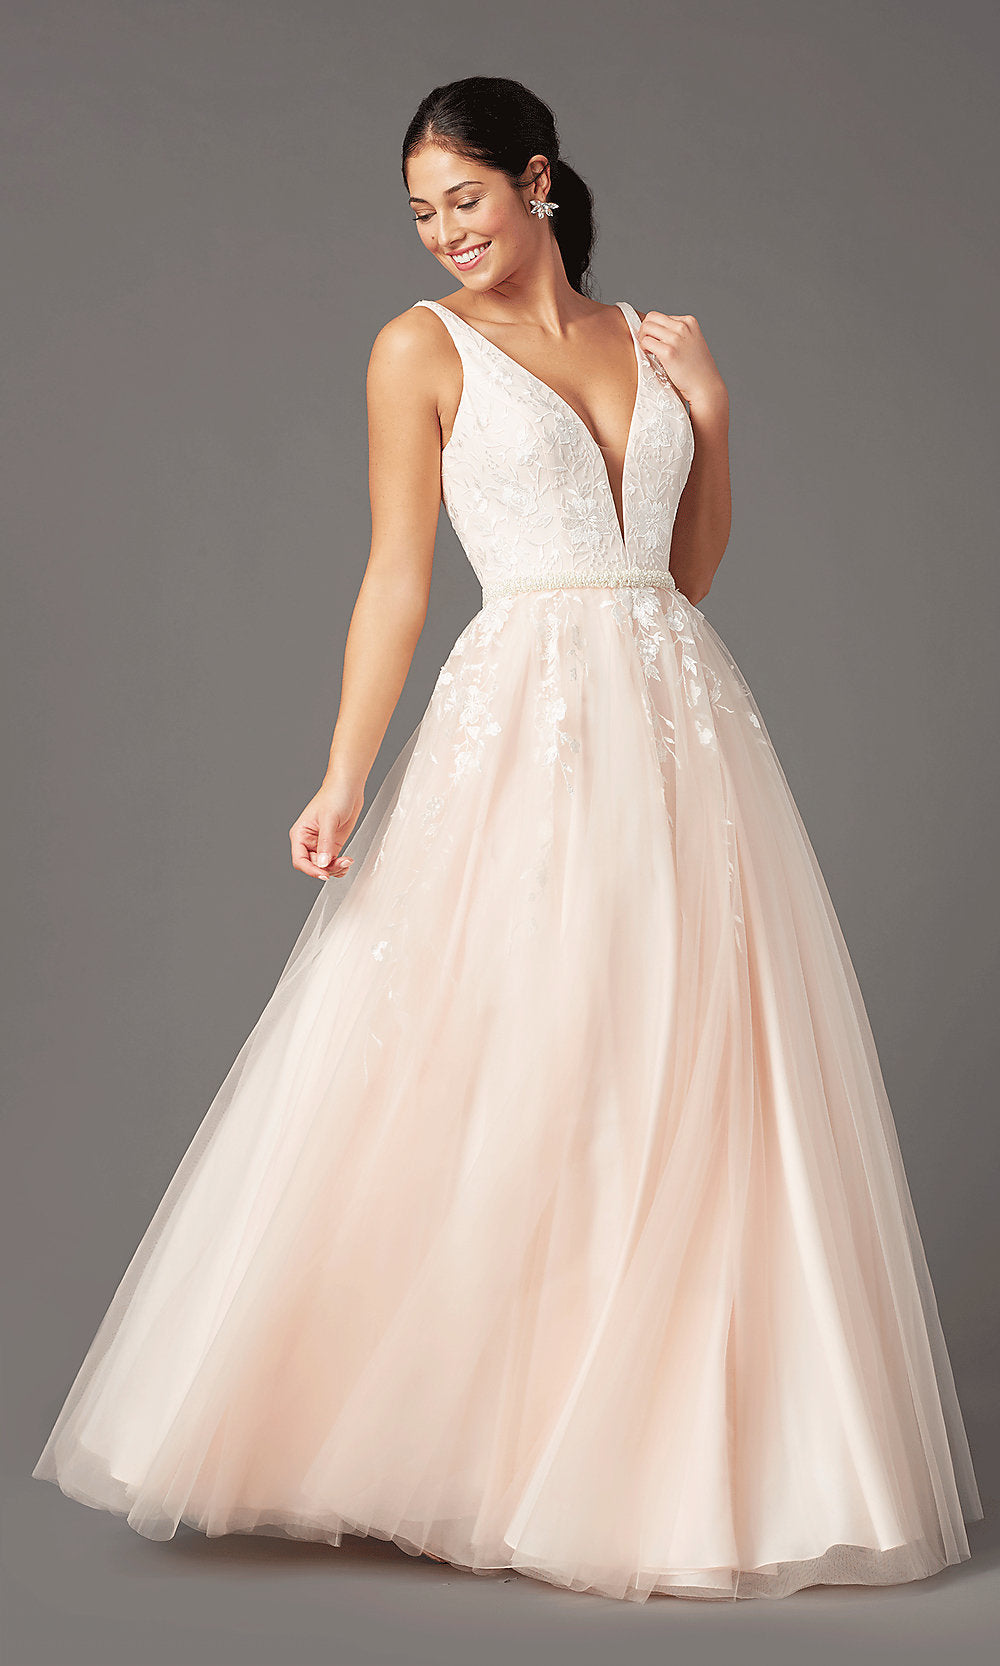 Long Deep-V-Neck Prom Ball Gown by PromGirl